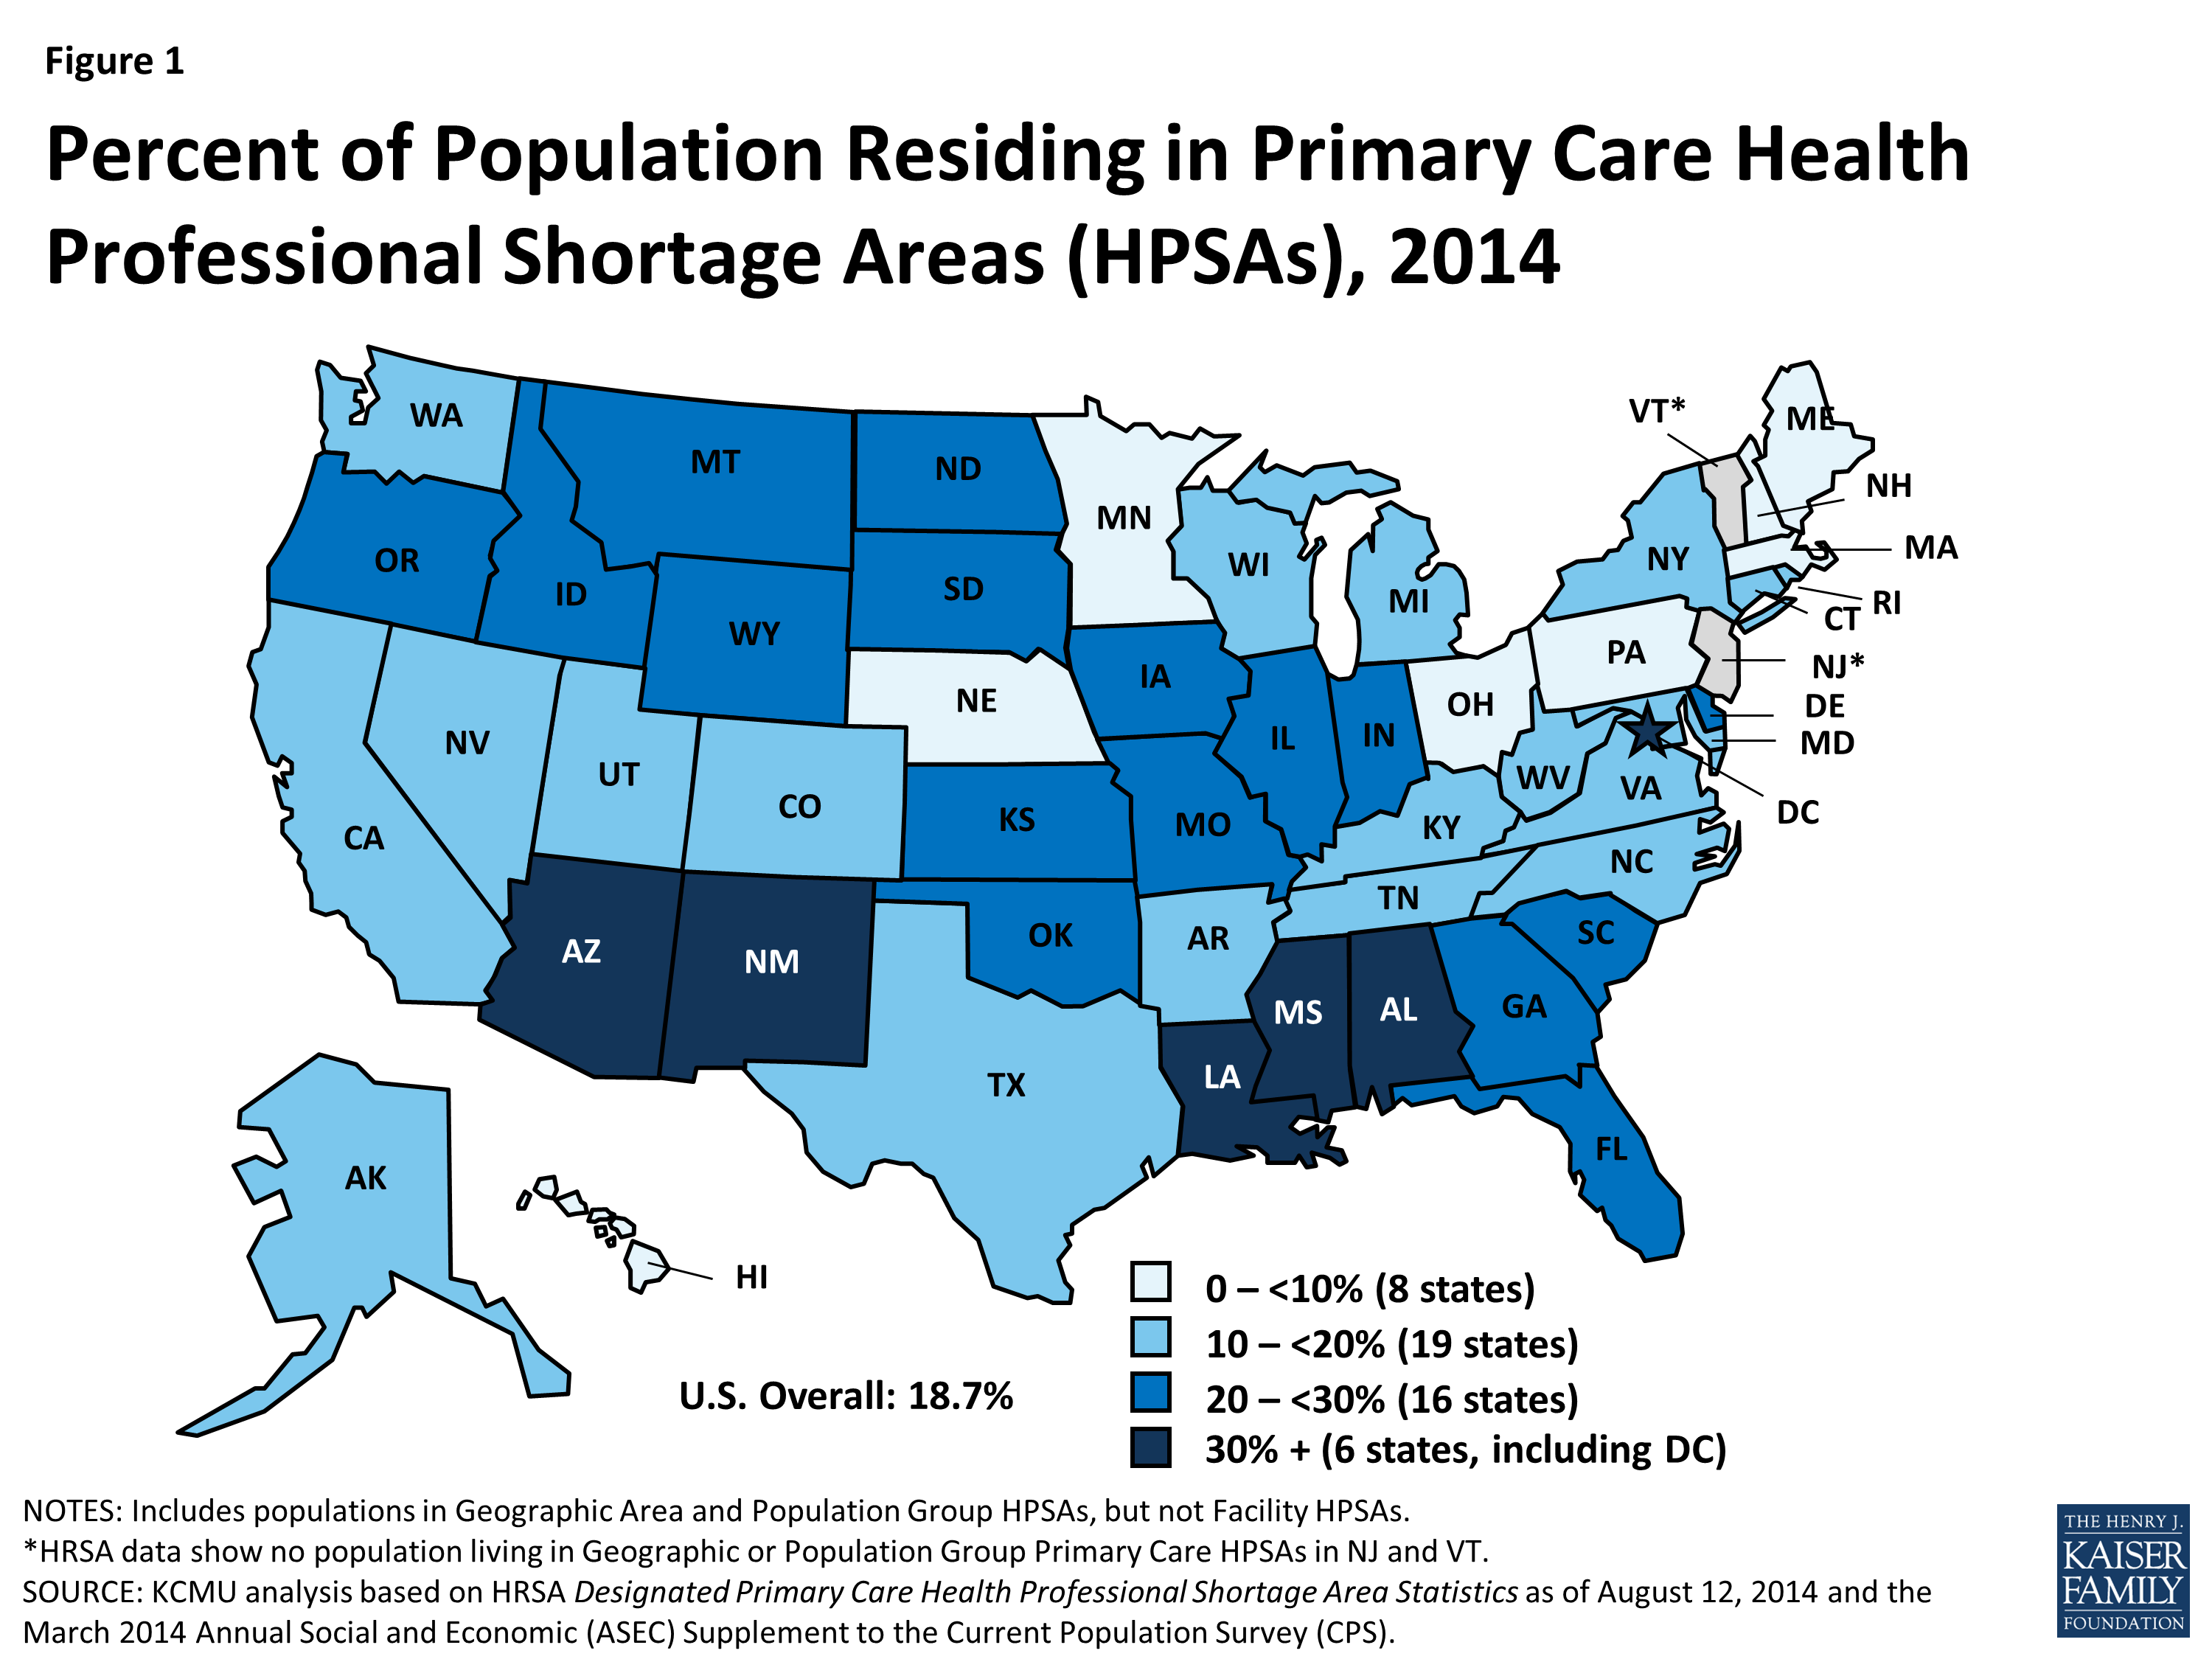 Percent of Population Residing in Primary Care Health Professional Shortage Areas